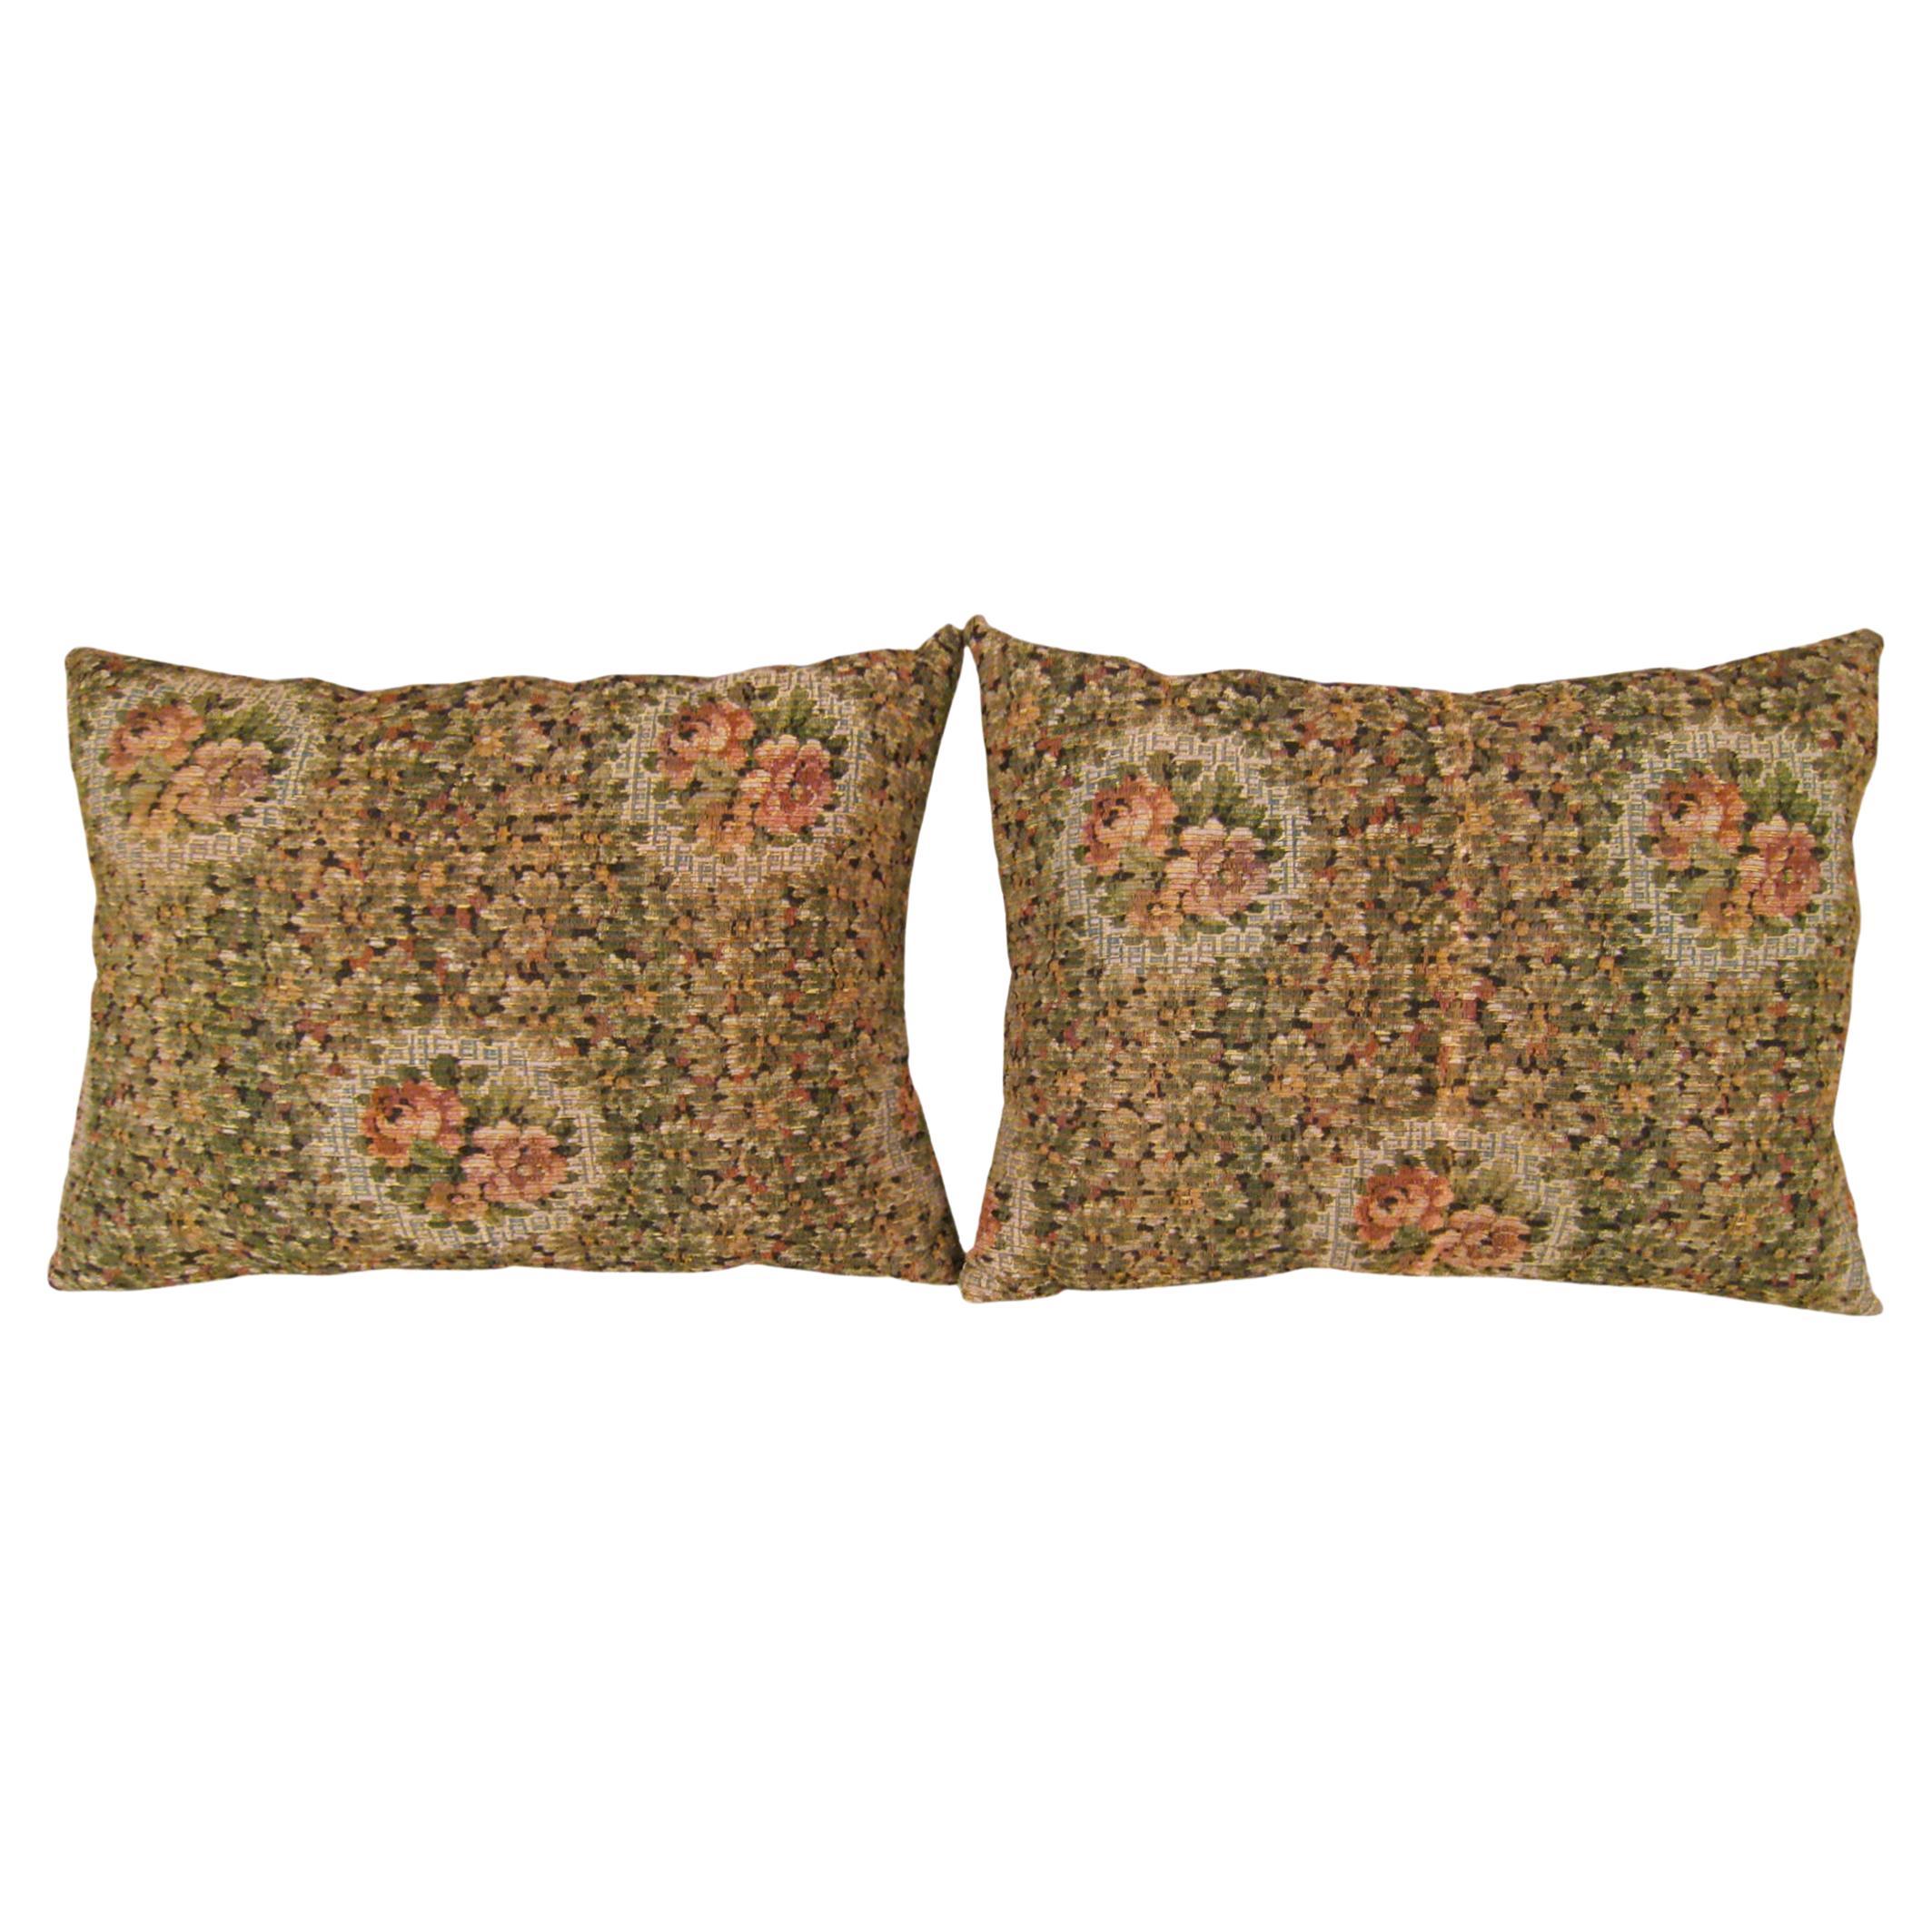 Pair of Decorative Antique Jacquard Tapestry Pillows with Floral Elments For Sale